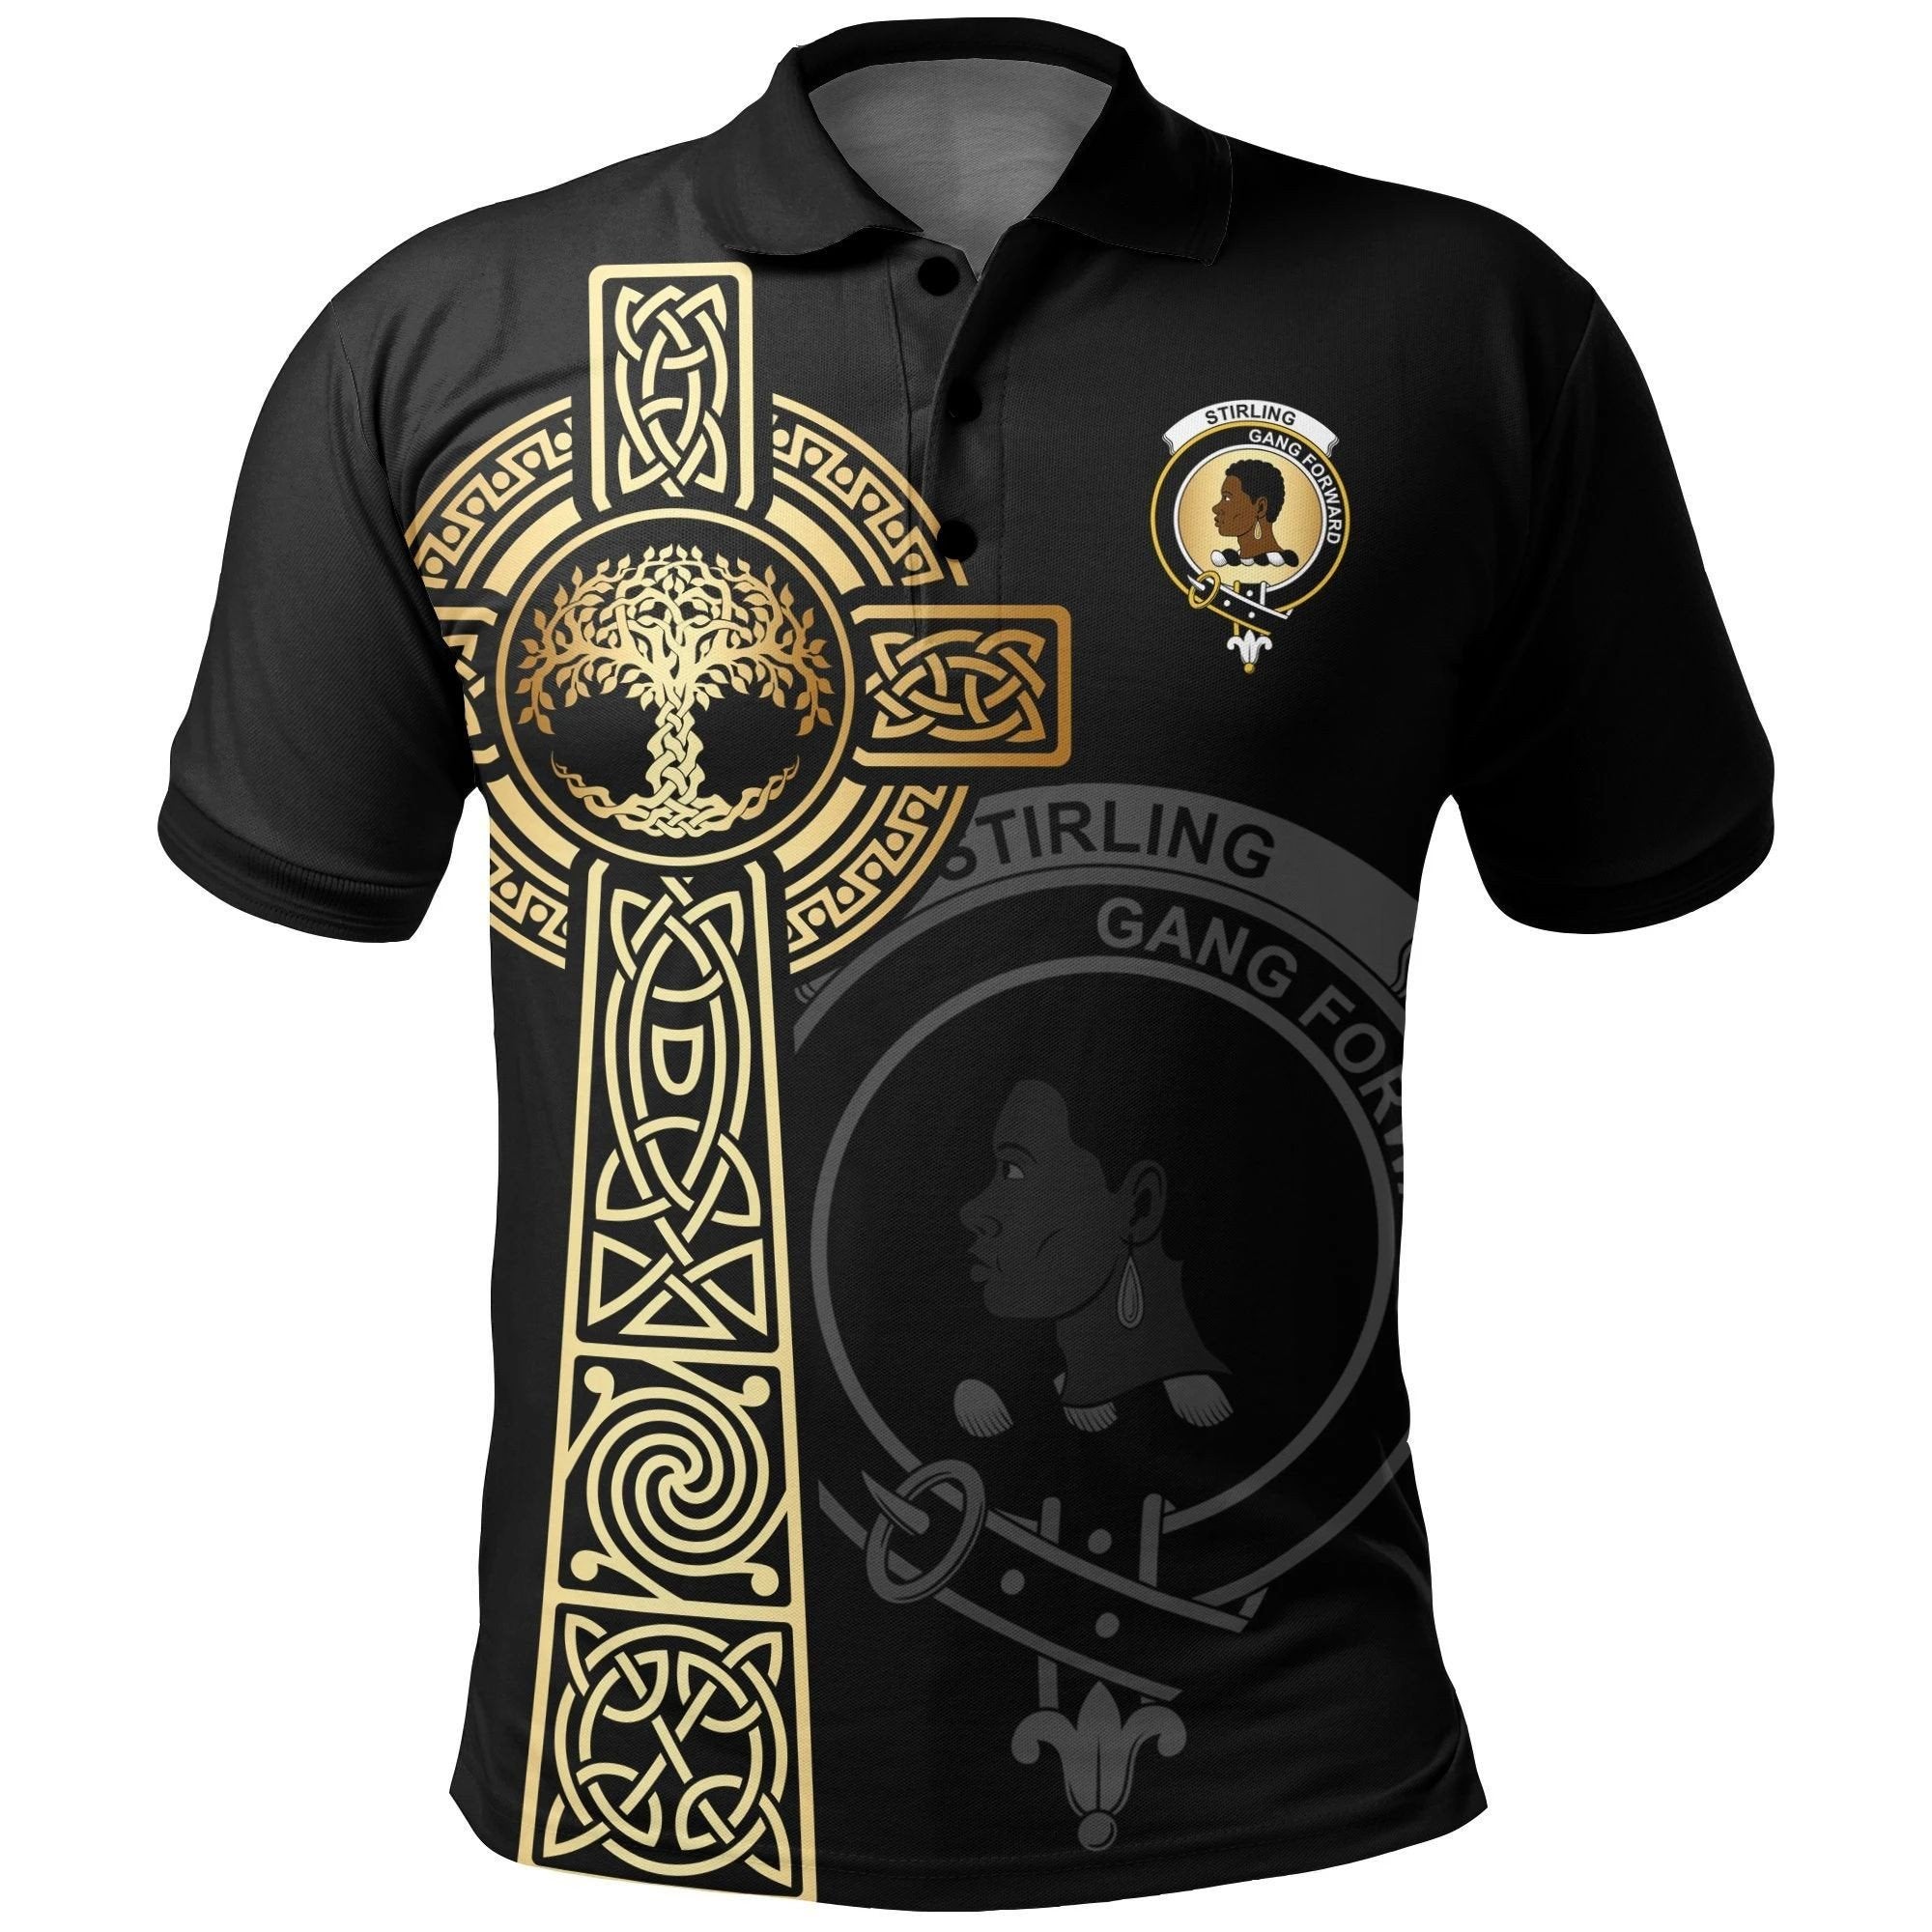 Stirling (of Keir) Clan Polo Shirt, Scottish Tartan Stirling (of Keir) Clans Polo Shirt Tree Of Life Style